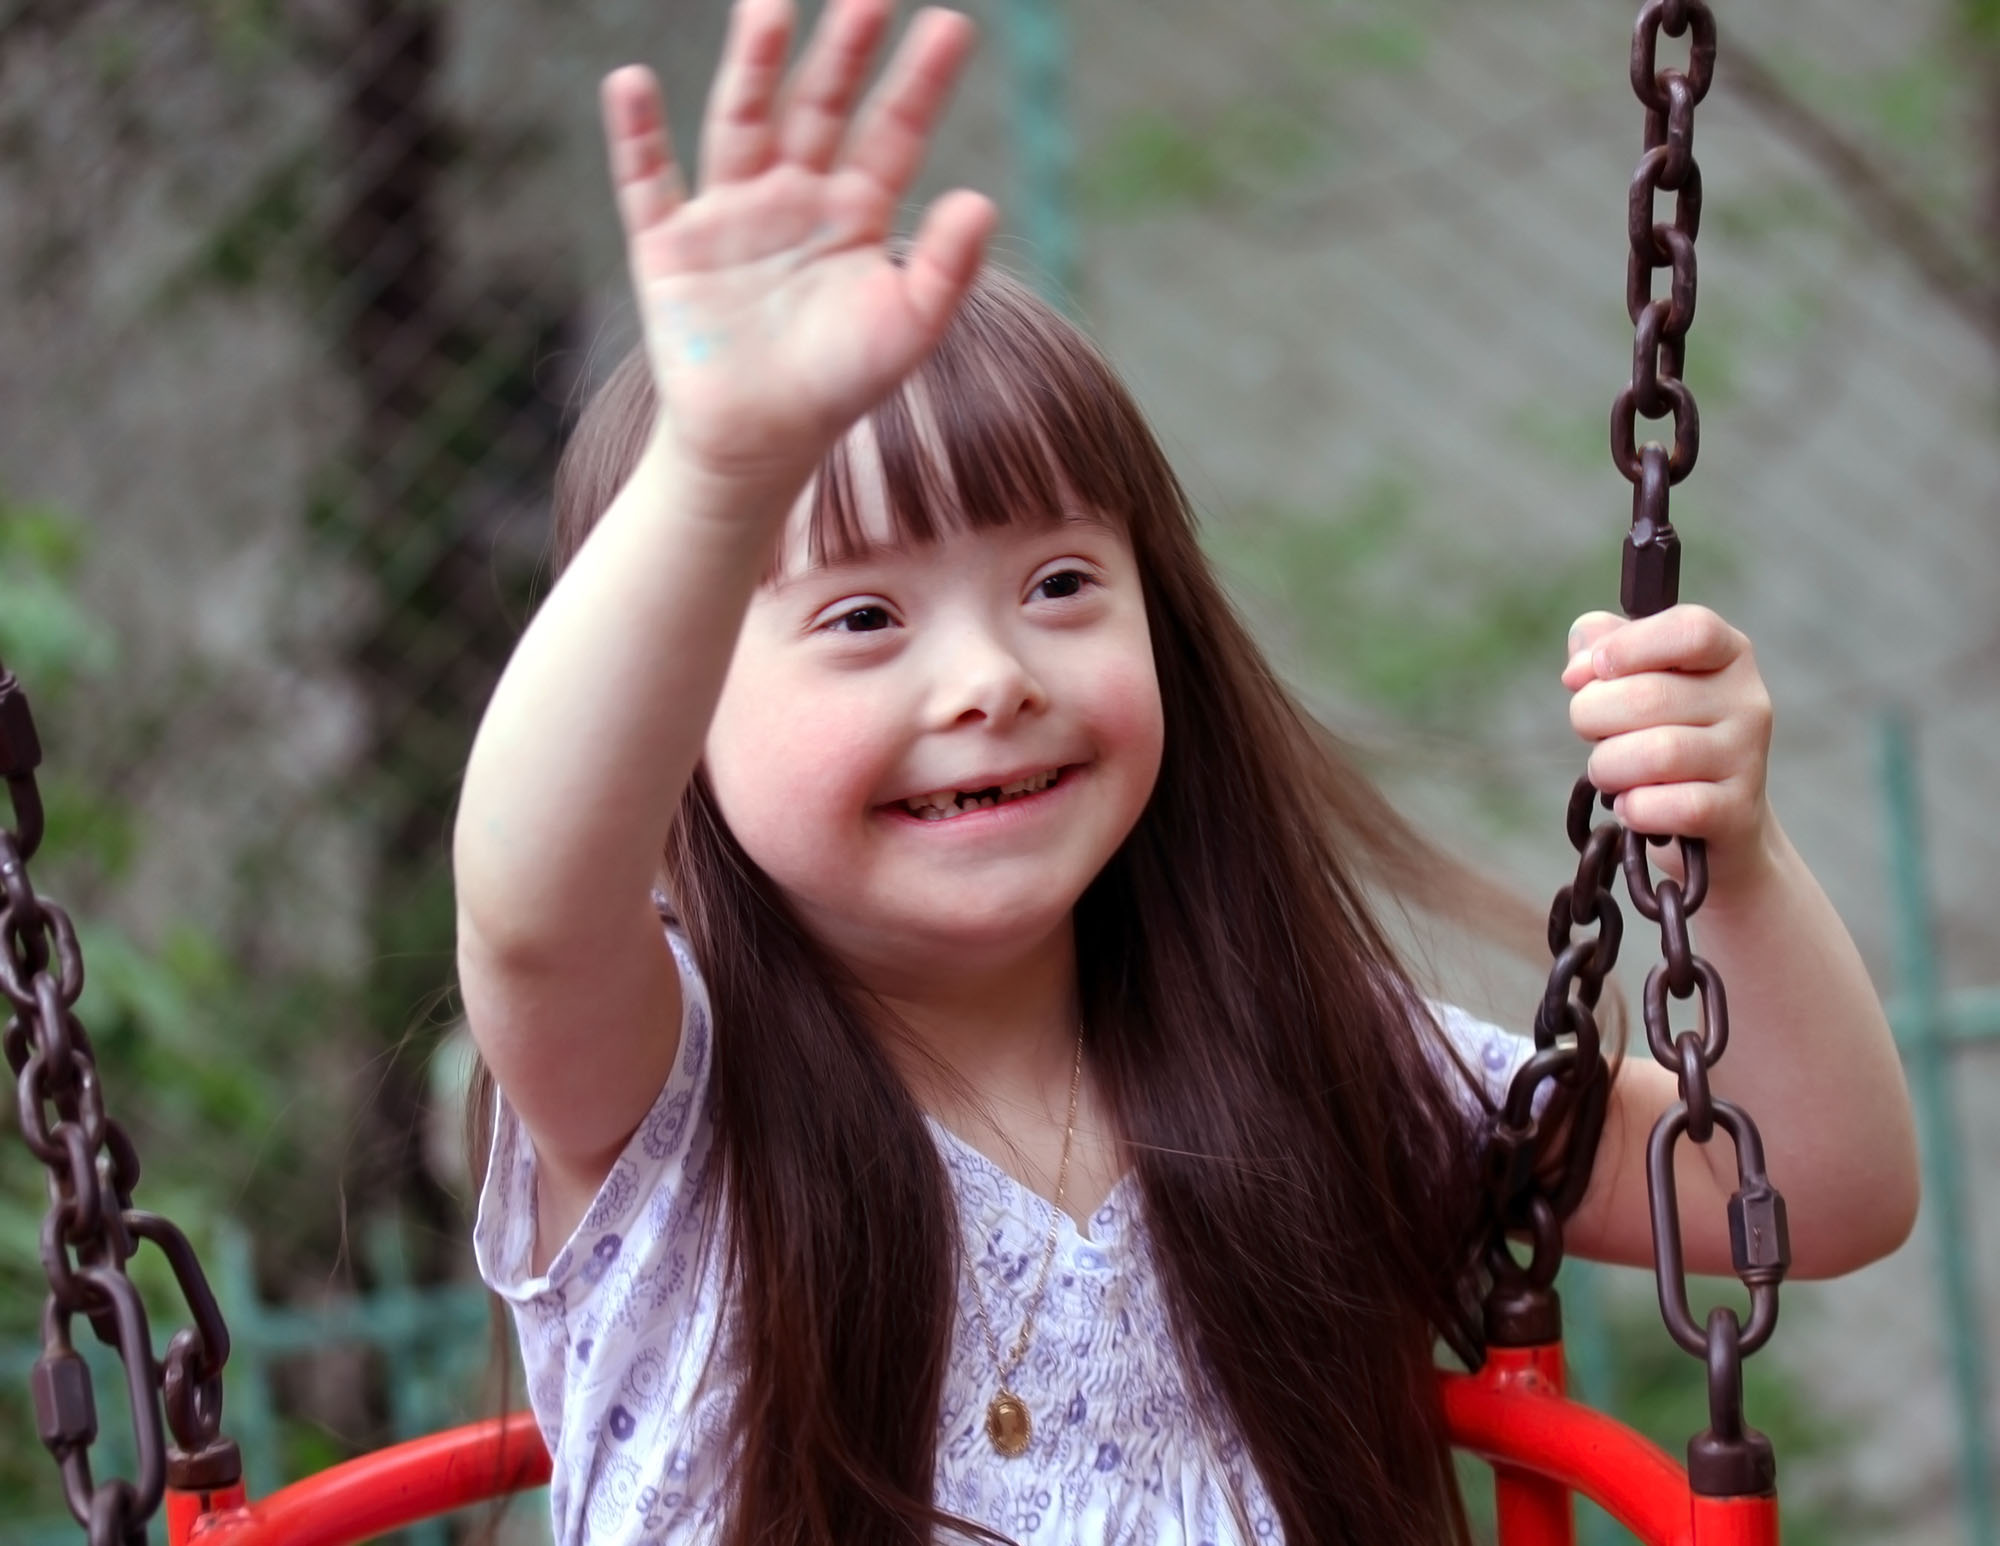 Children With Down Syndrome - Physical Complications & What You Can Do About Them?